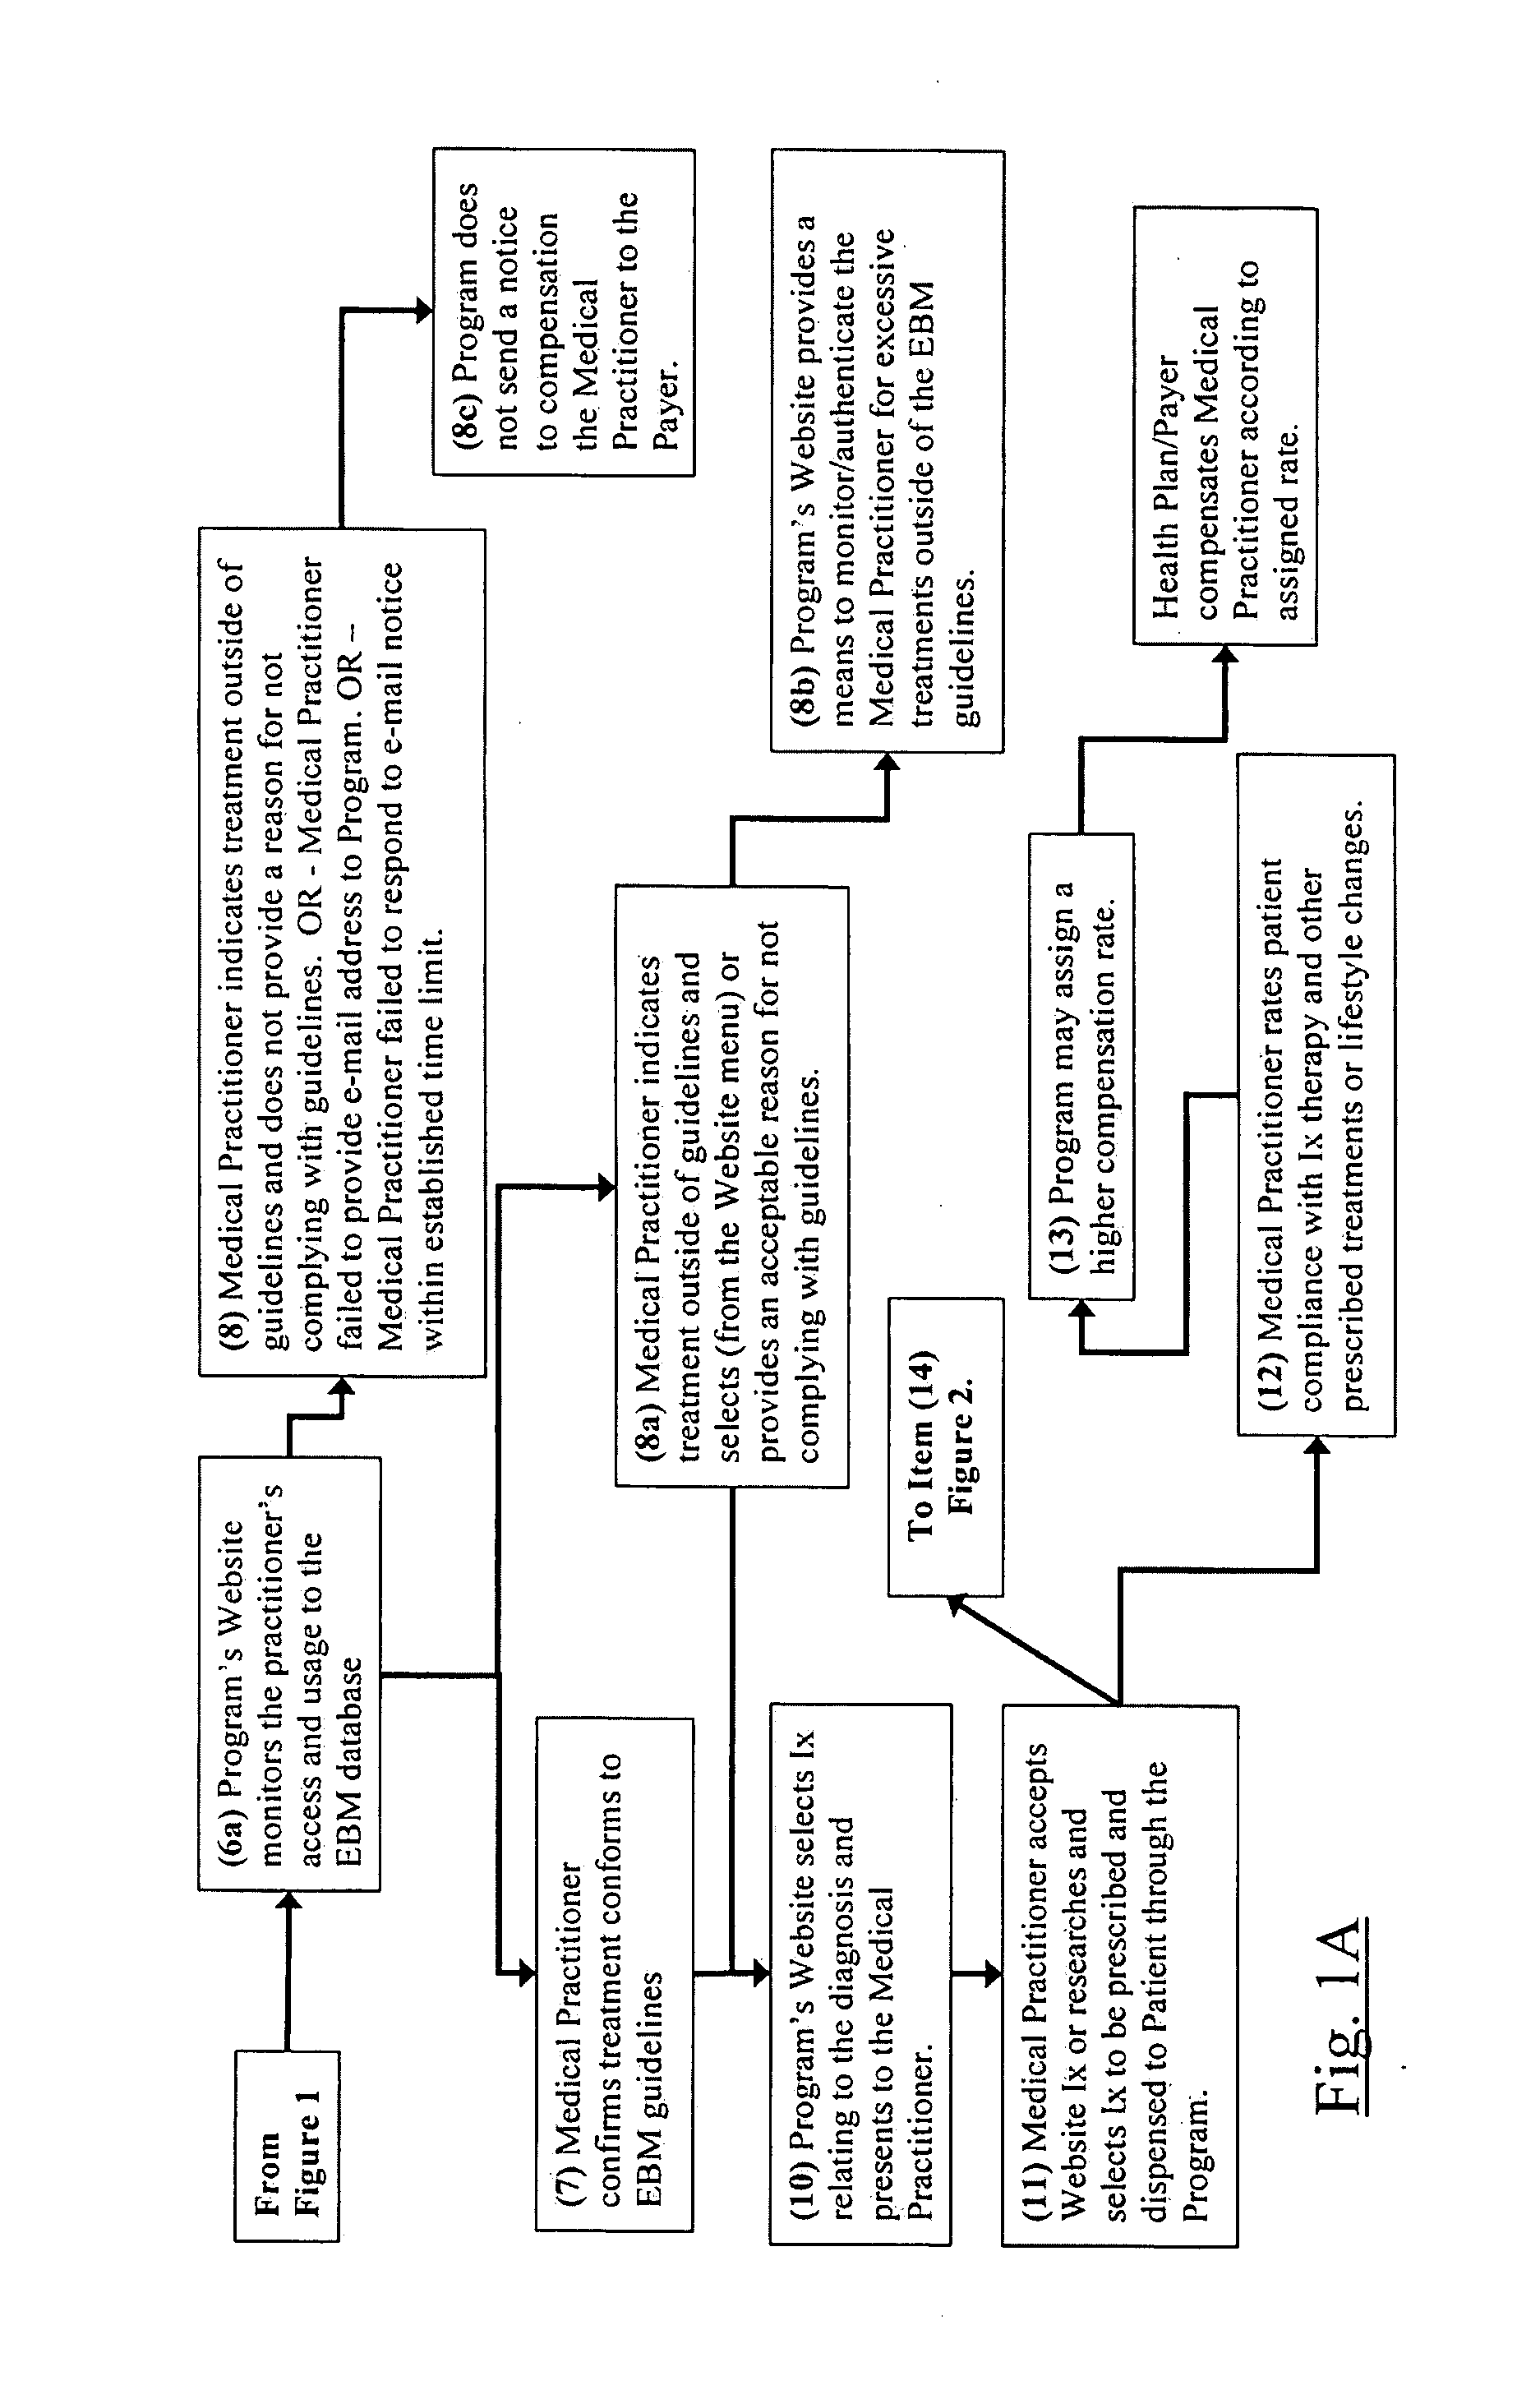 Method and System for Delivery of Healthcare Services